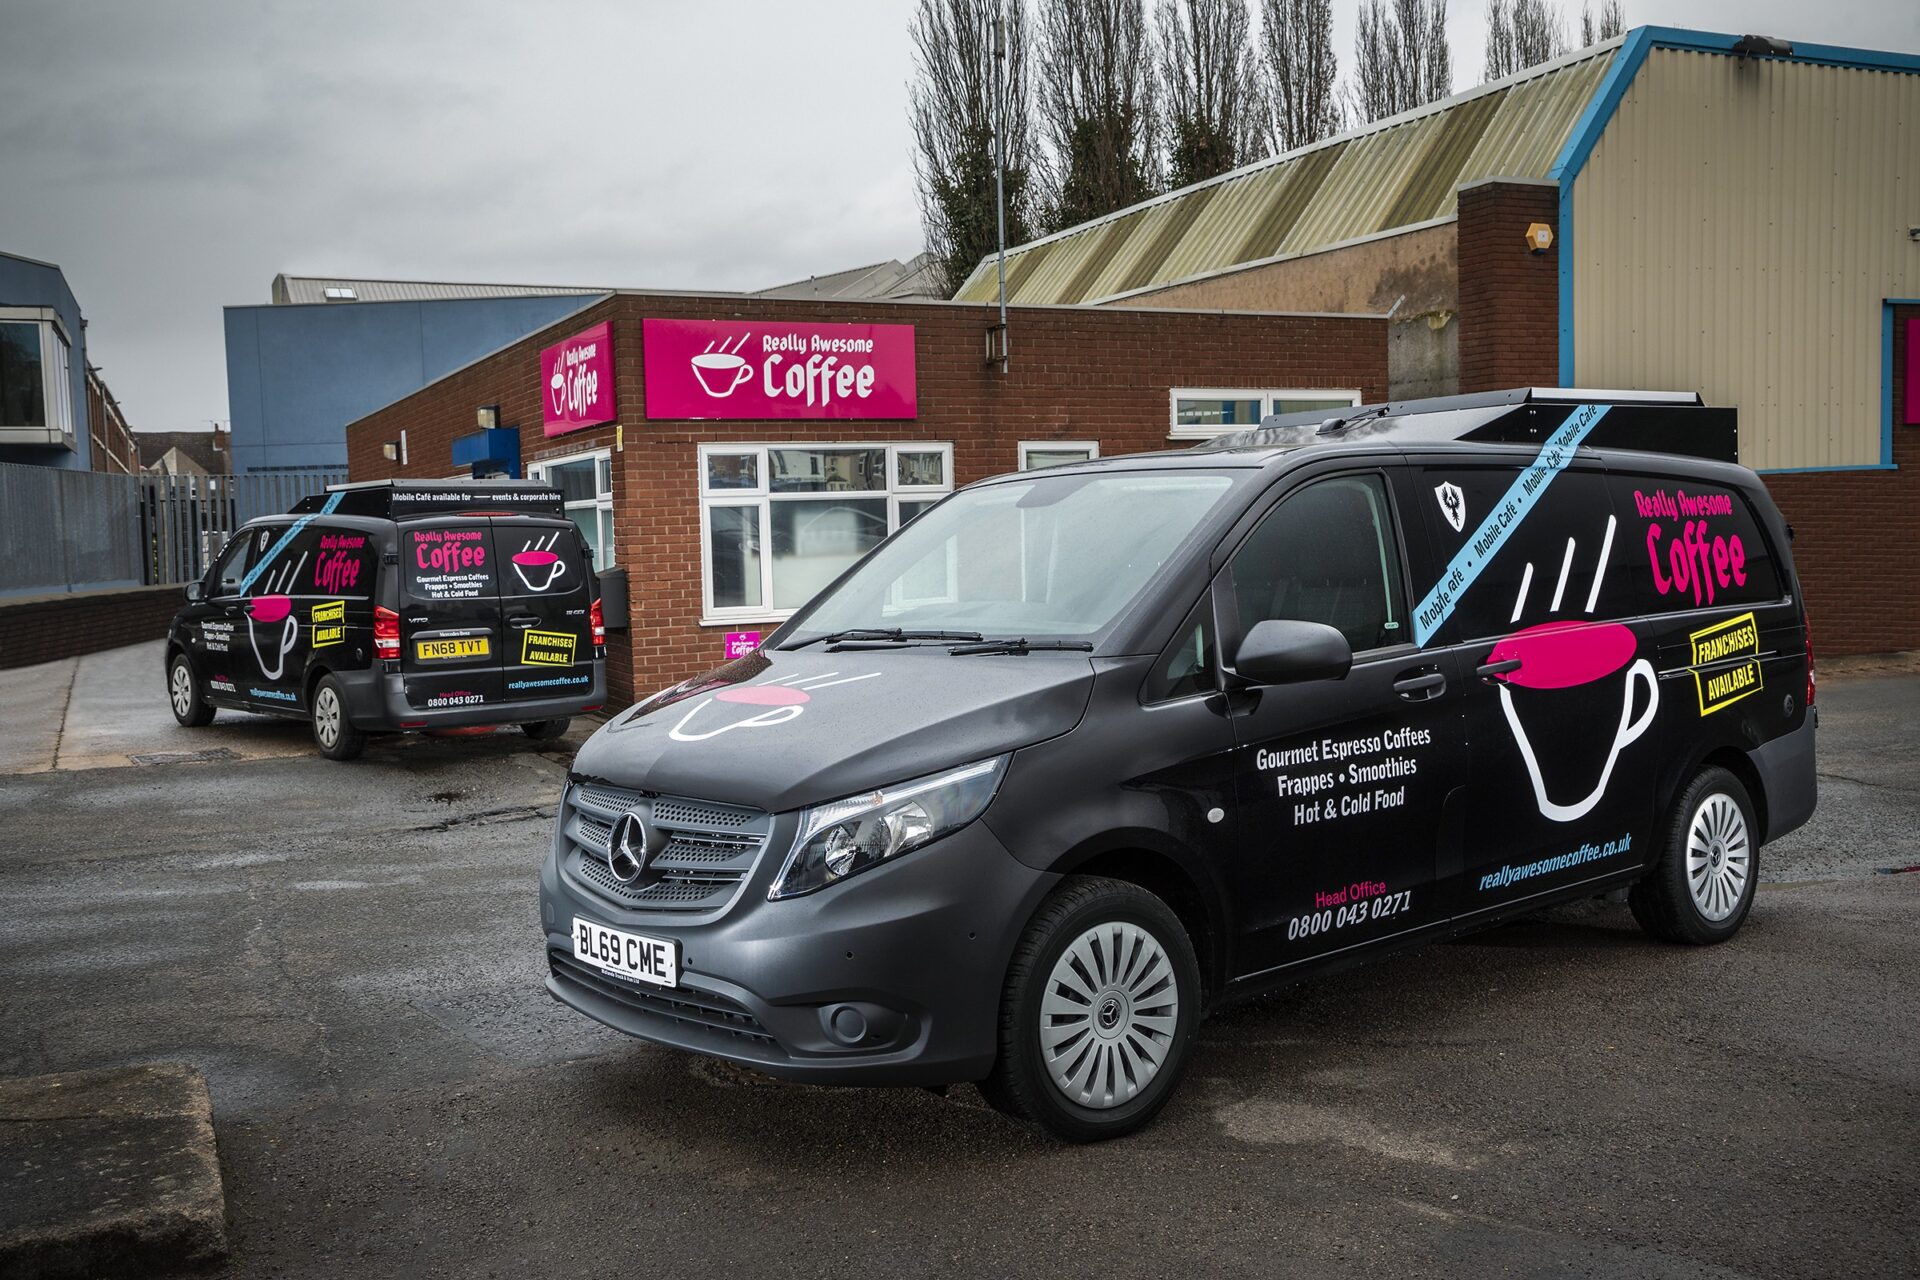 Why Mobile? The Flexibility of Van-Based Businesses